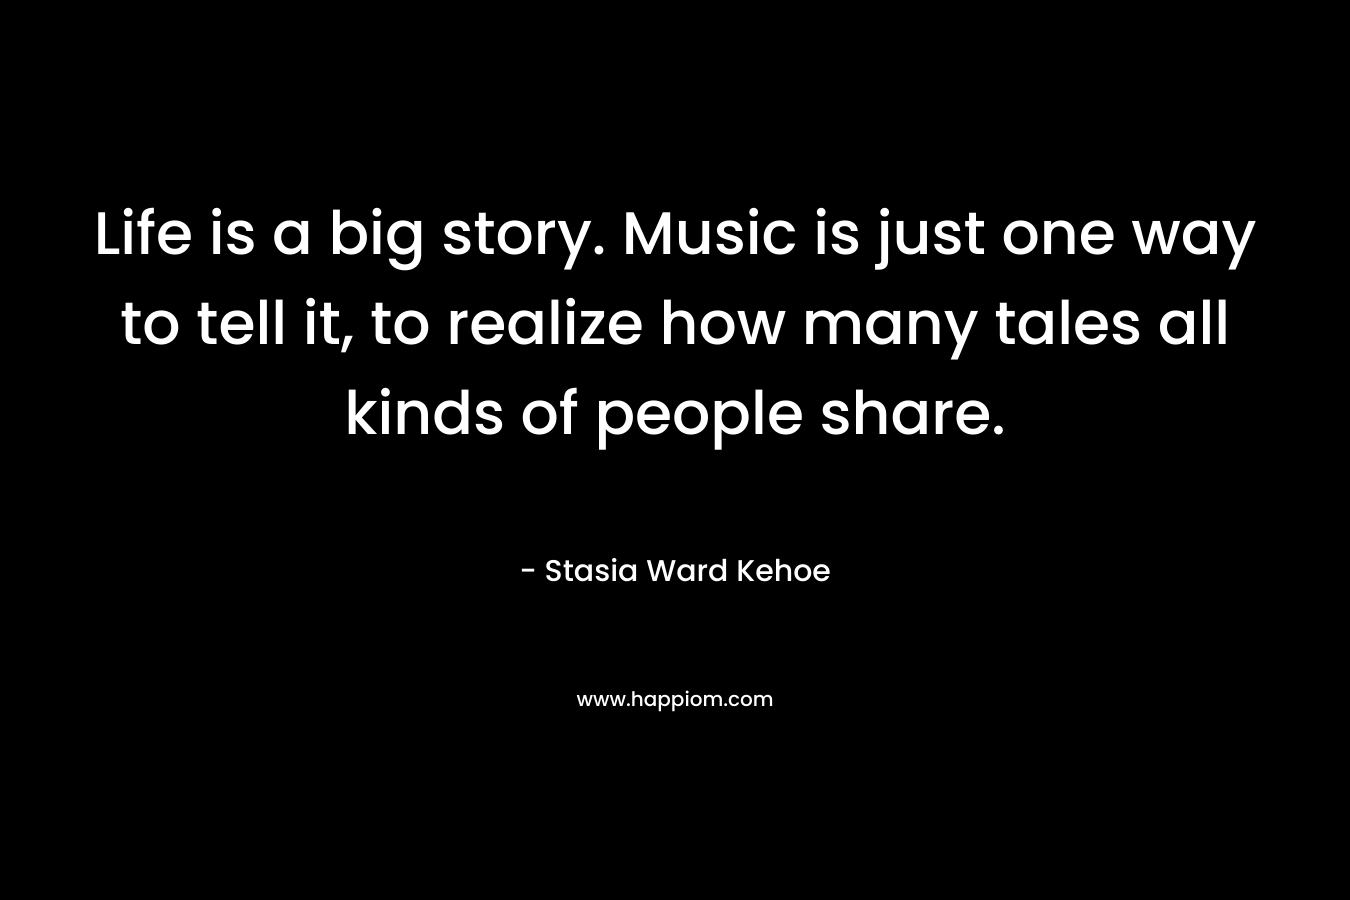 Life is a big story. Music is just one way to tell it, to realize how many tales all kinds of people share.